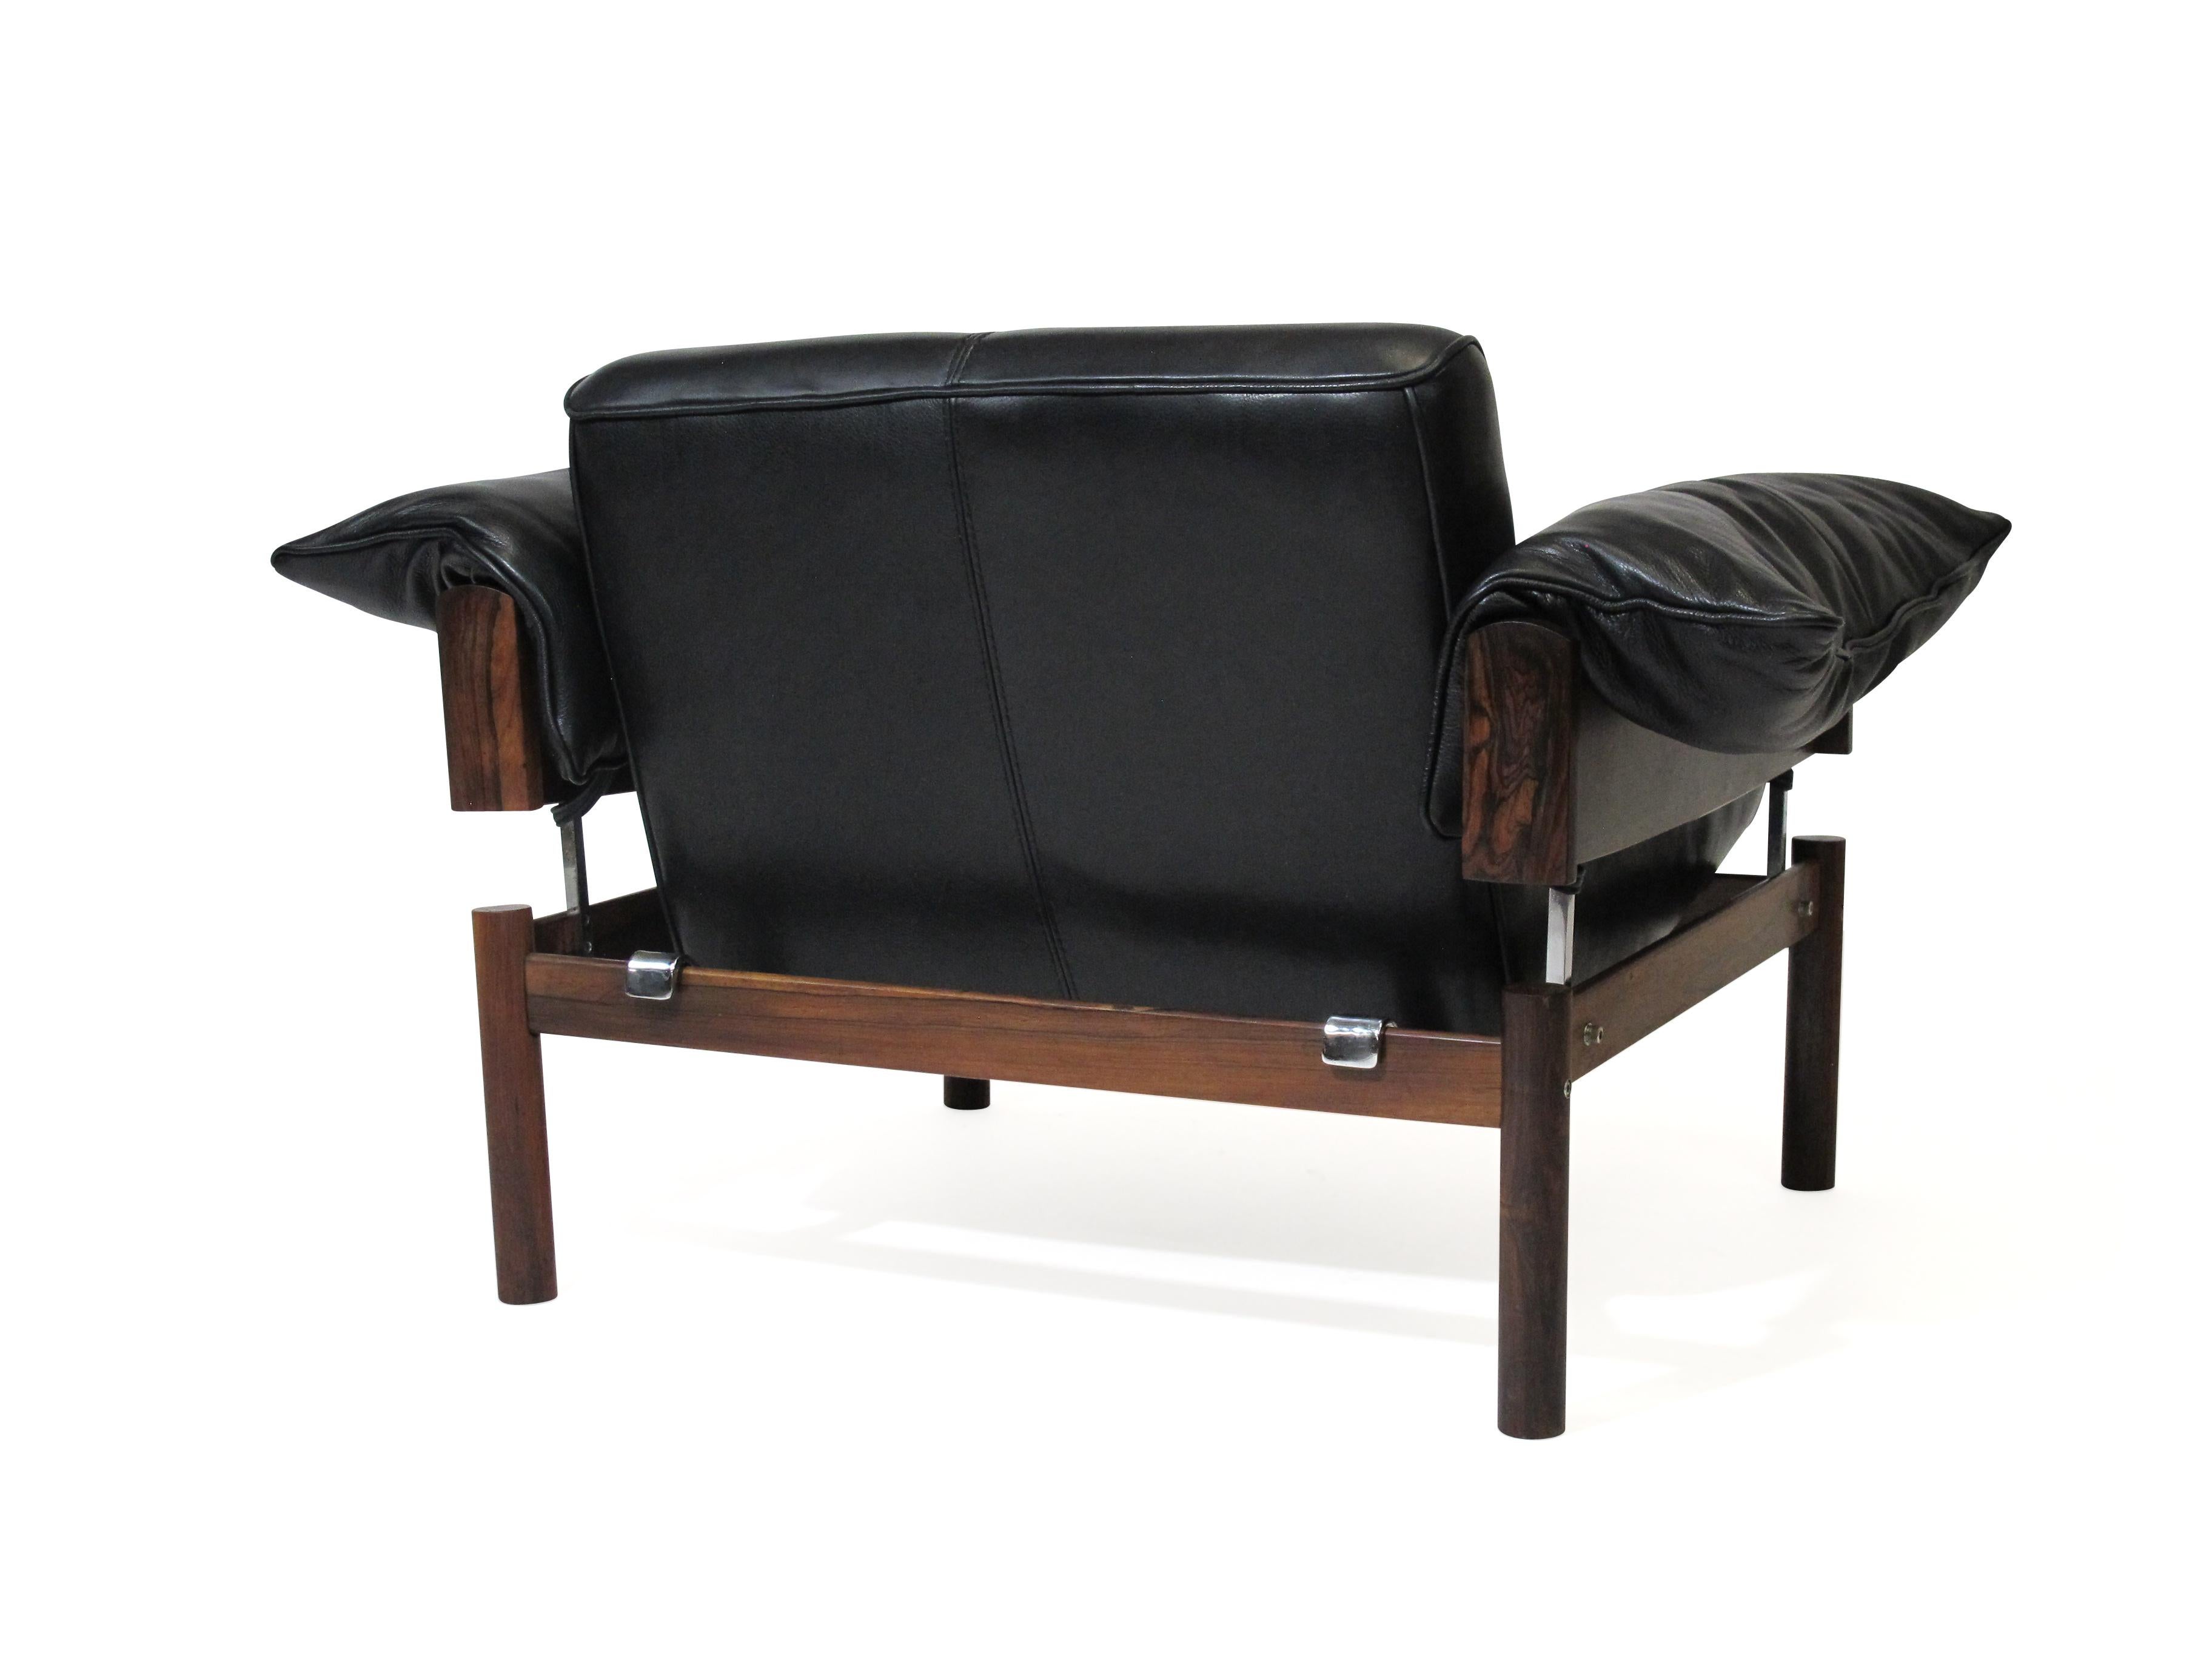 1960 Percival Lafer Brazilian Rosewood Sofa and Chair in Black Leather 3